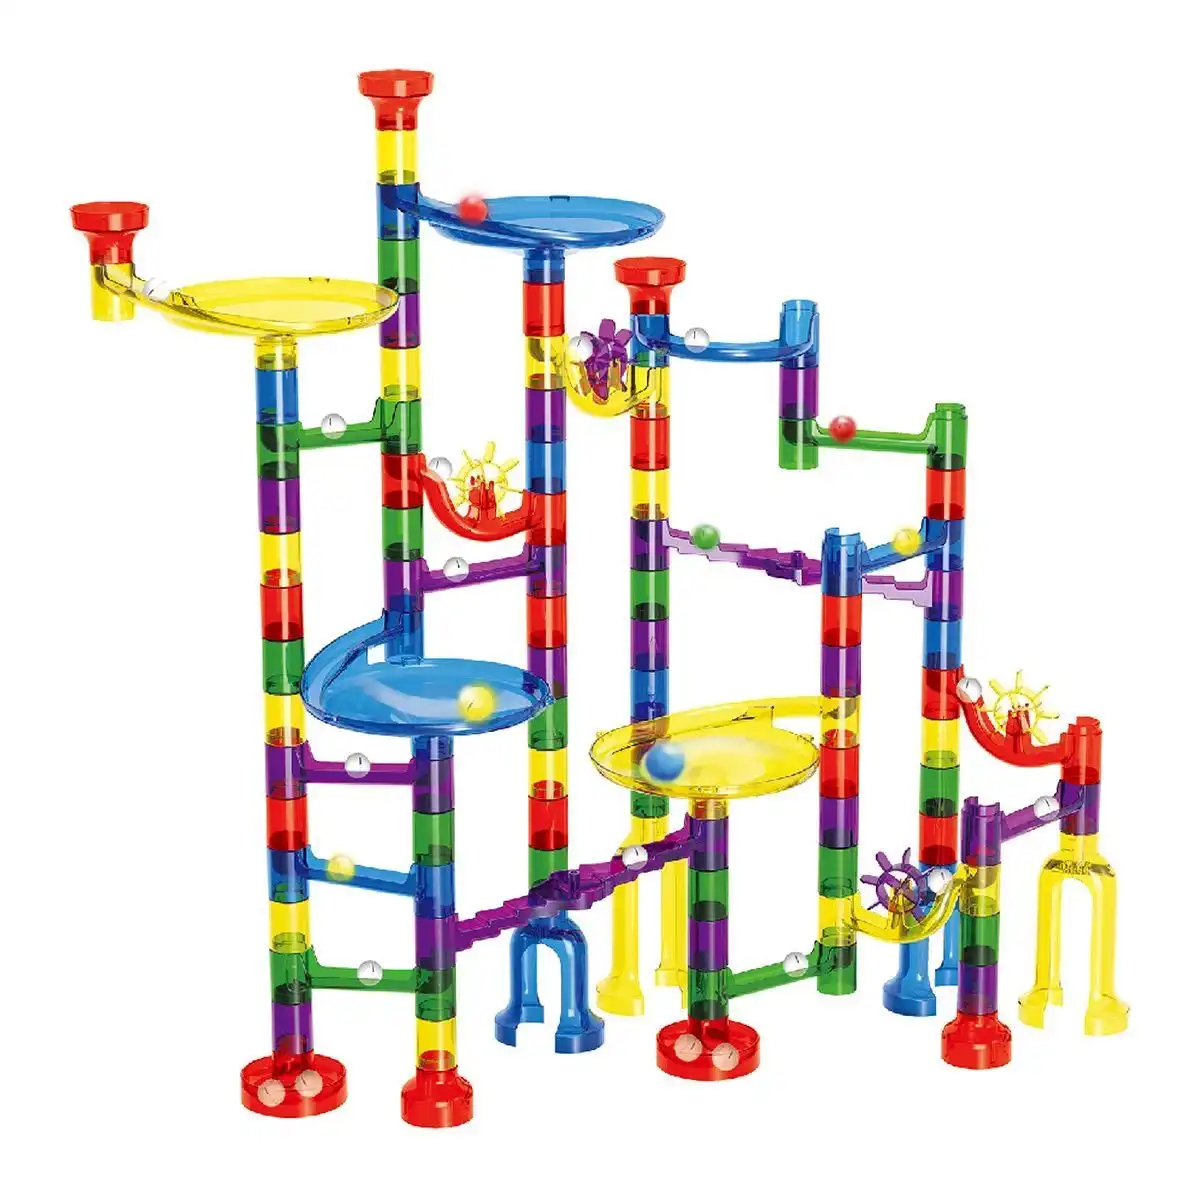 Ausway 122PCS Marble Run Game Marble Race Track Light Marbles Kids Birthday Gift